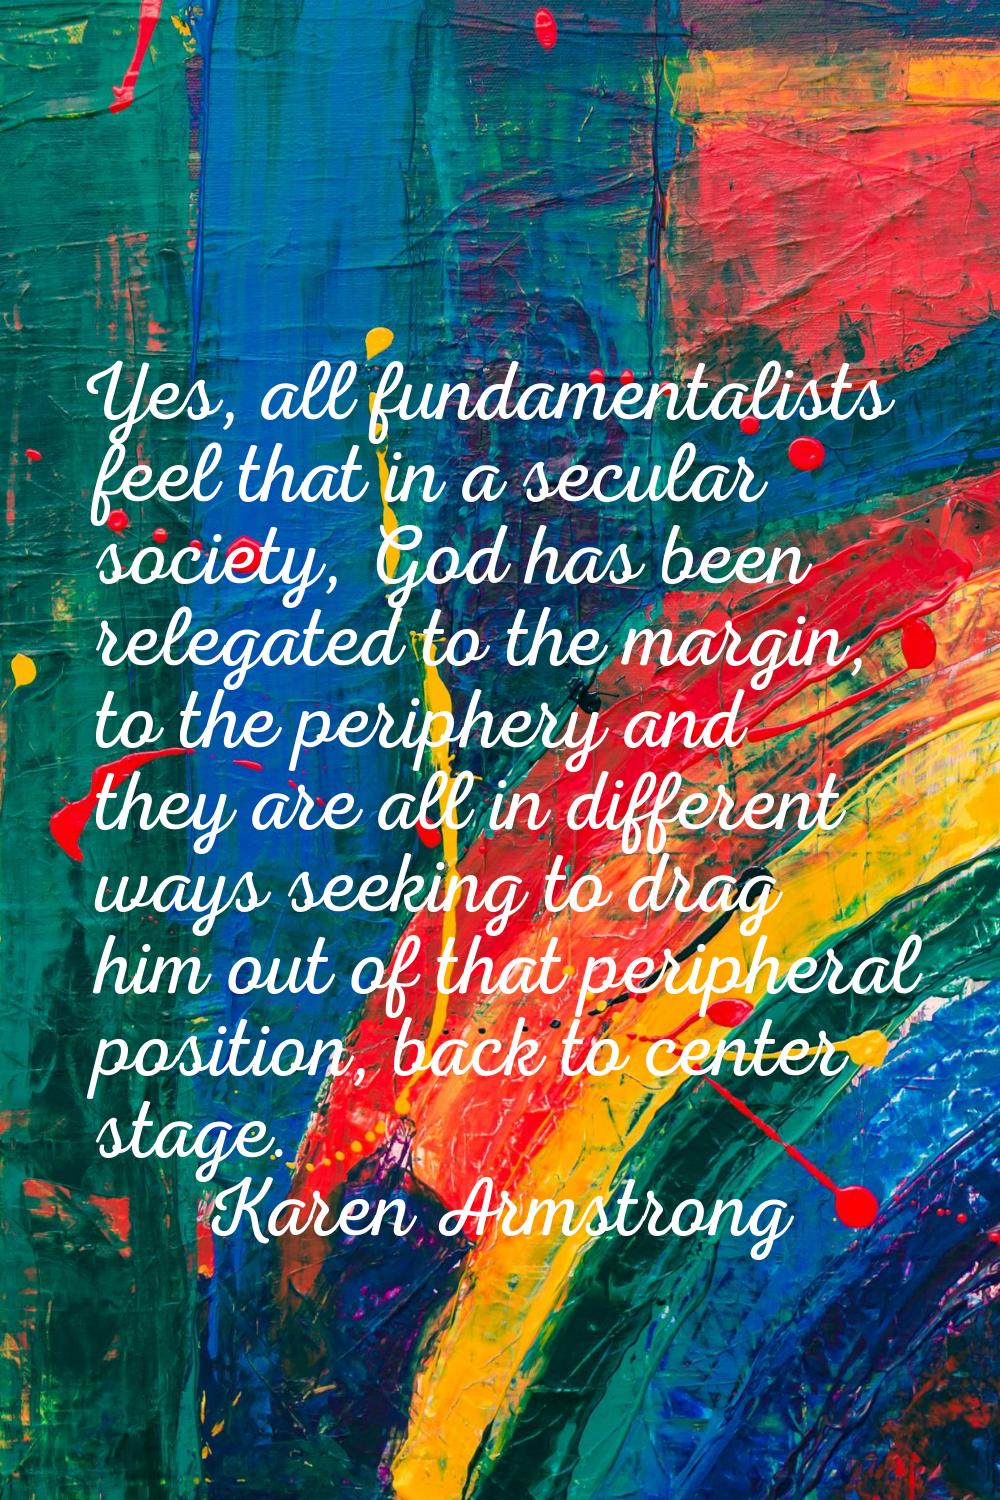 Yes, all fundamentalists feel that in a secular society, God has been relegated to the margin, to t